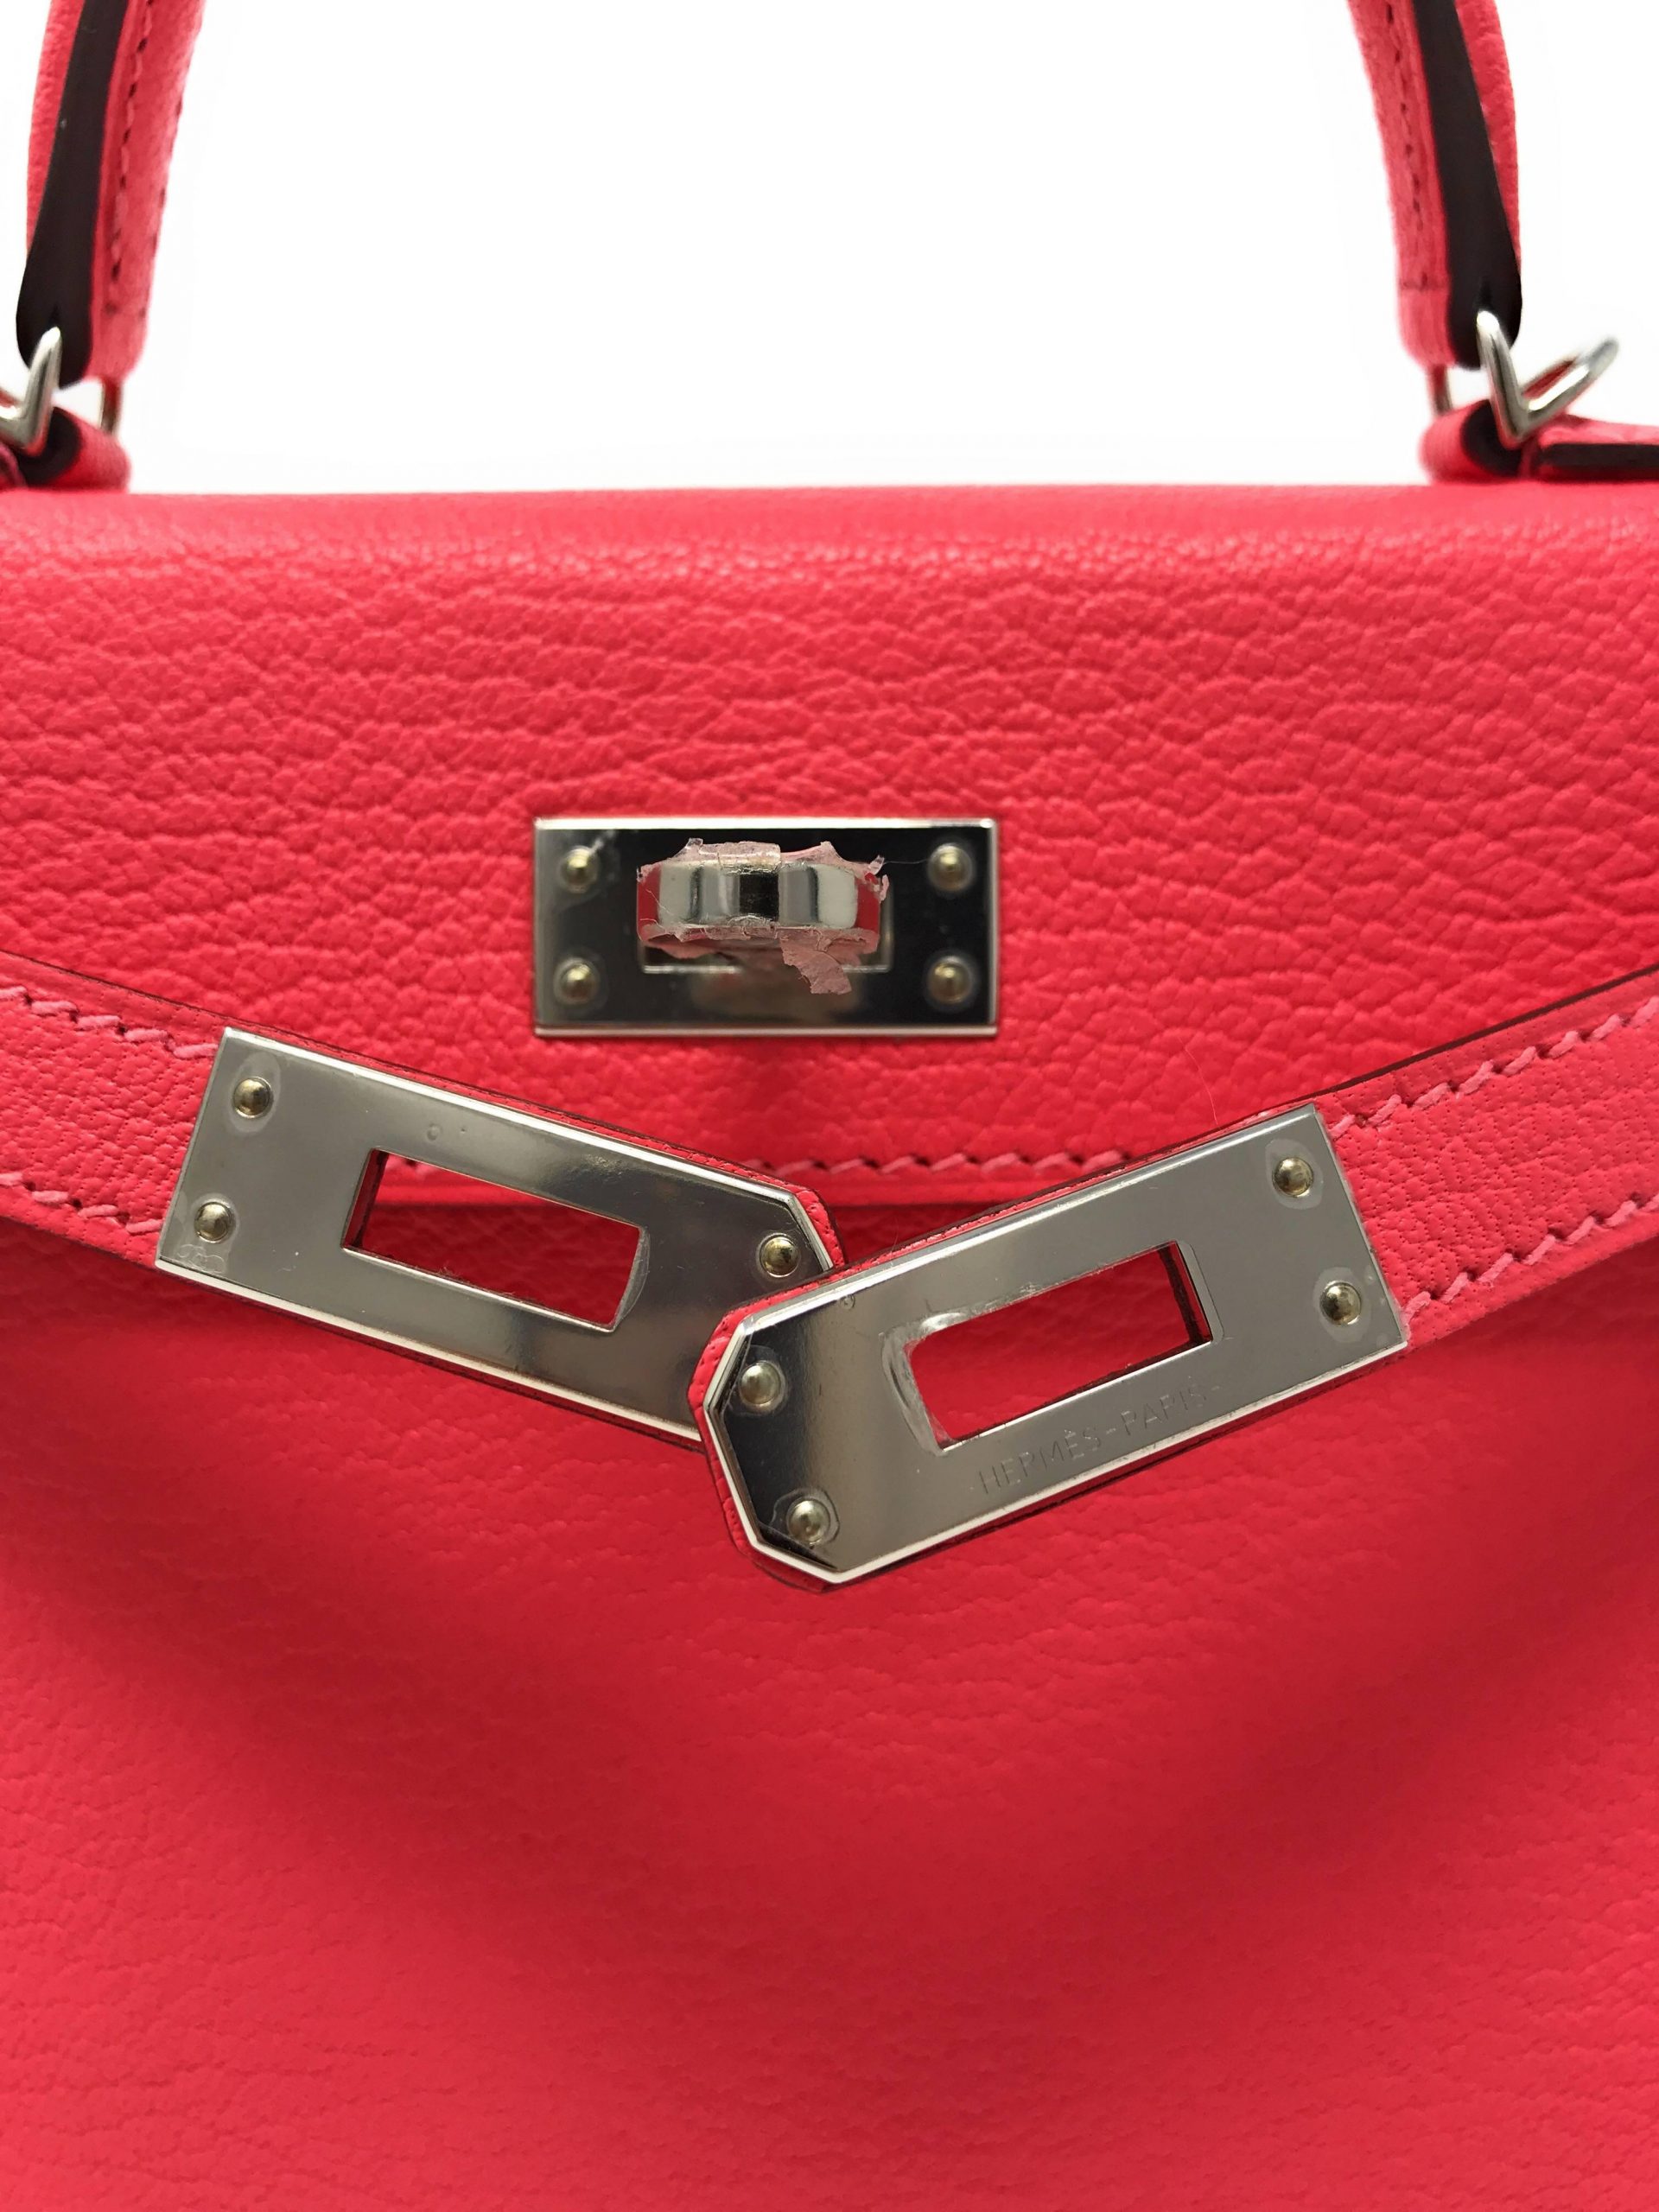 A ROUGE TOMATE EPSOM LEATHER MINI KELLY 20 II WITH GOLD HARDWARE